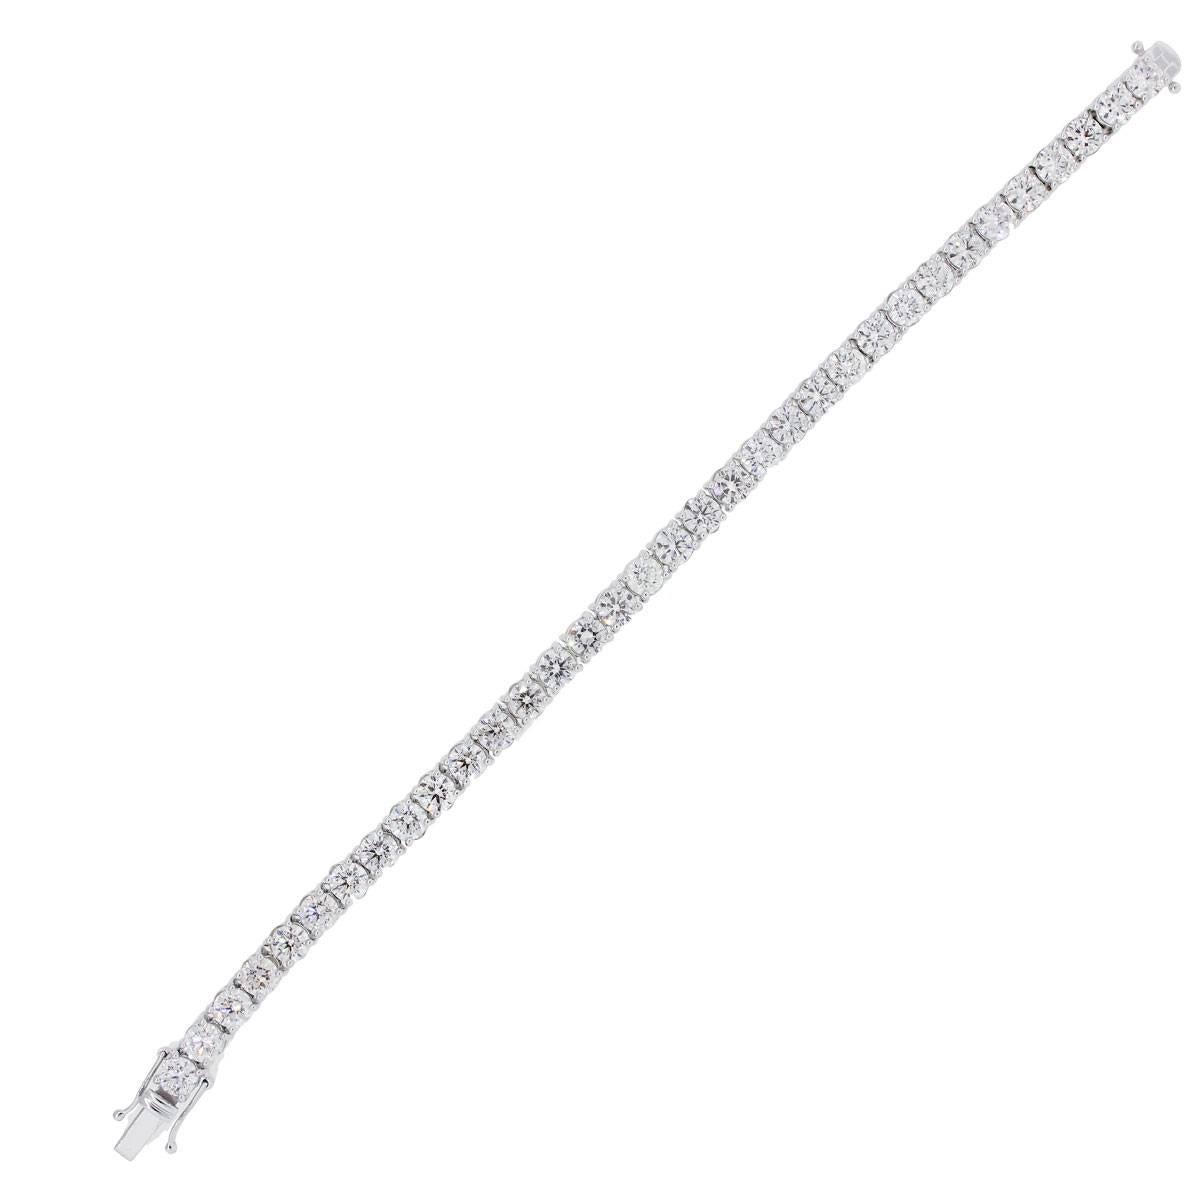 Material: 14k white gold
Diamond Details: Approximately 14.12ctw round brilliant diamonds. Diamonds are I/J in color and SI in clarity.
Clasp: Tongue in box clasp
Measurements: 7.25″
Total Weight: 18.2g (11.7dwt)
Additional Details: This item comes